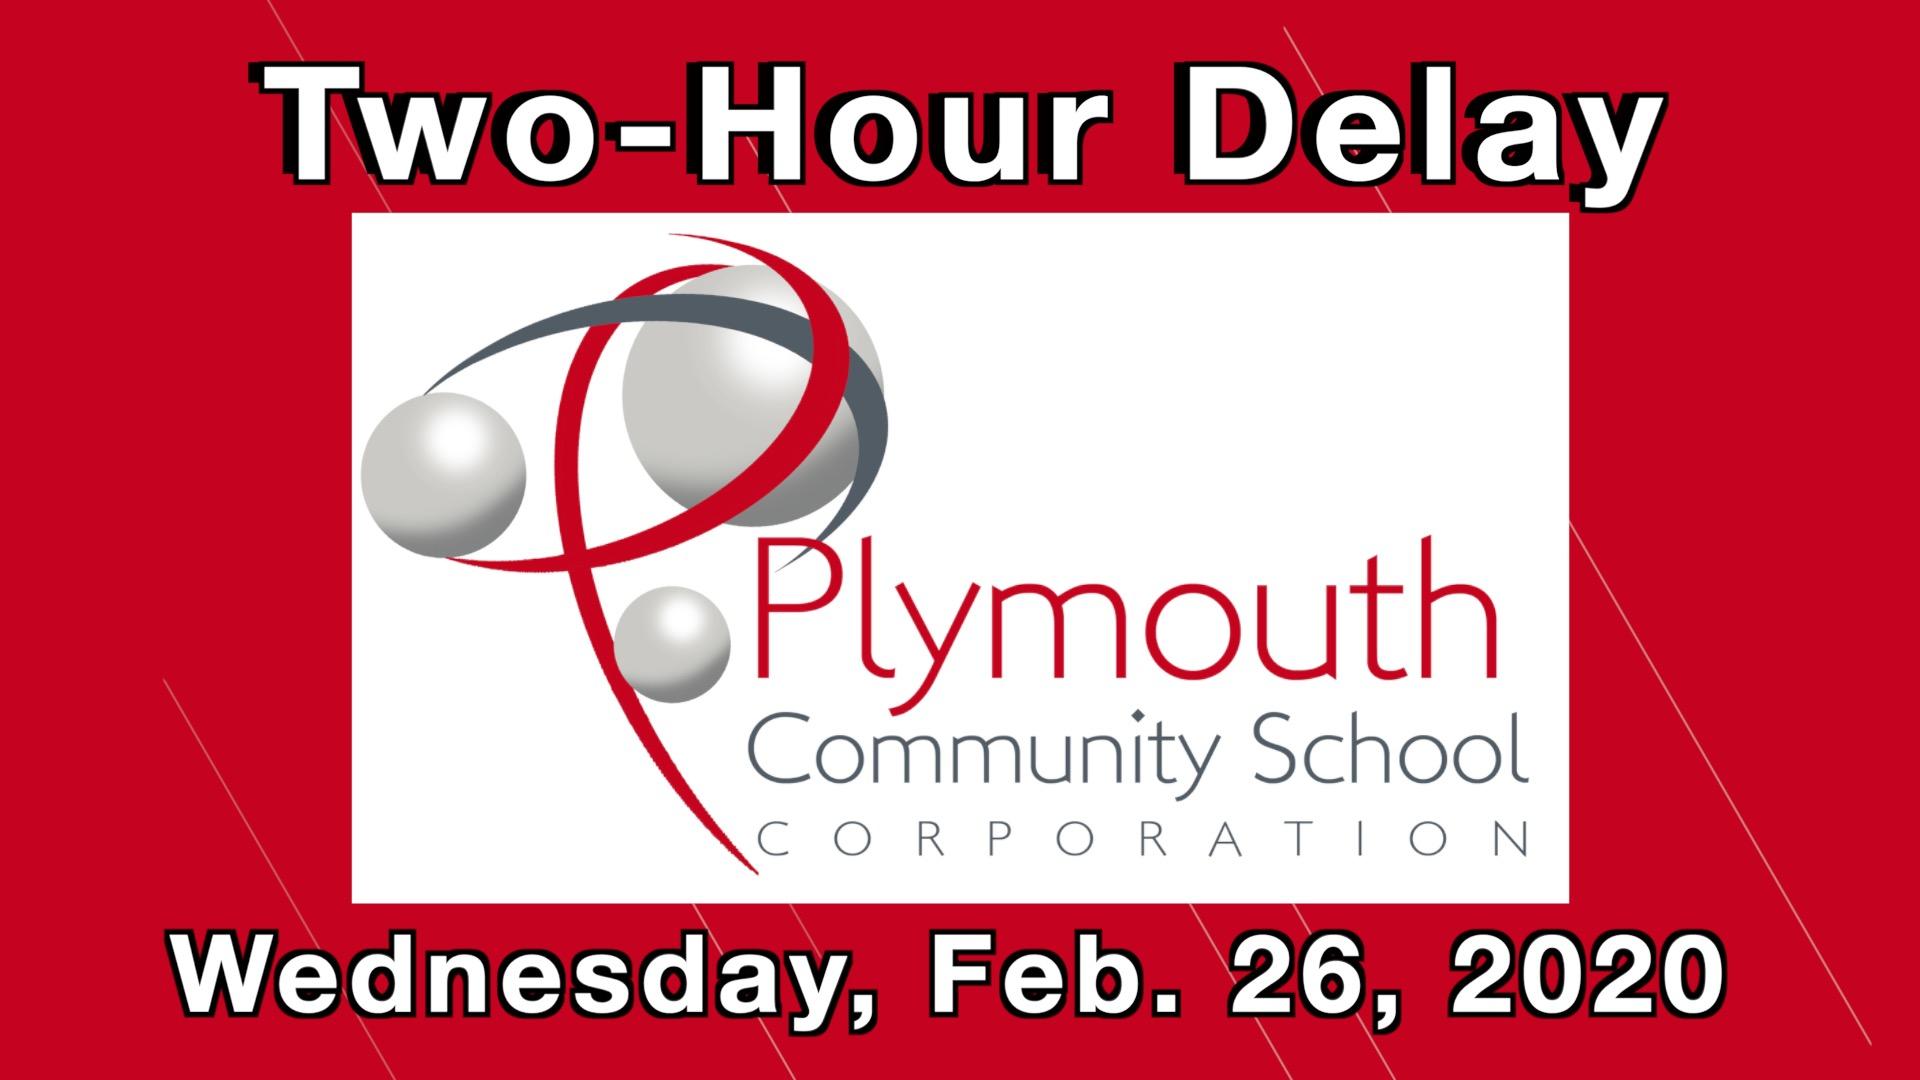 Two-Hour Delay on Wednesday, Feb. 26, 2020 with PCSC logo on red background